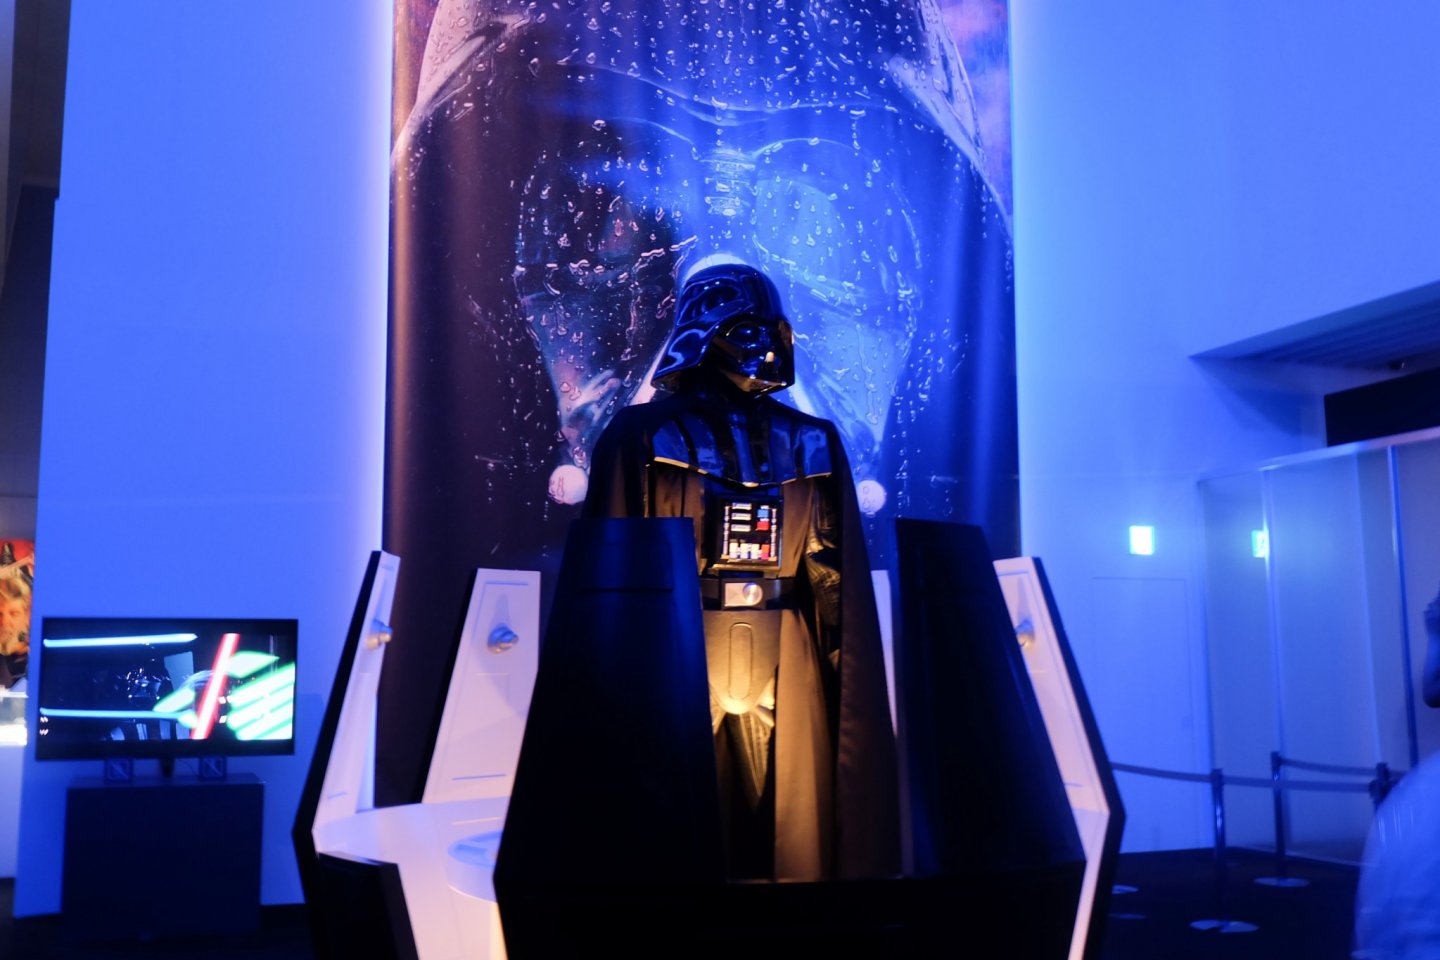 Darth Vader welcomes you to the galaxy